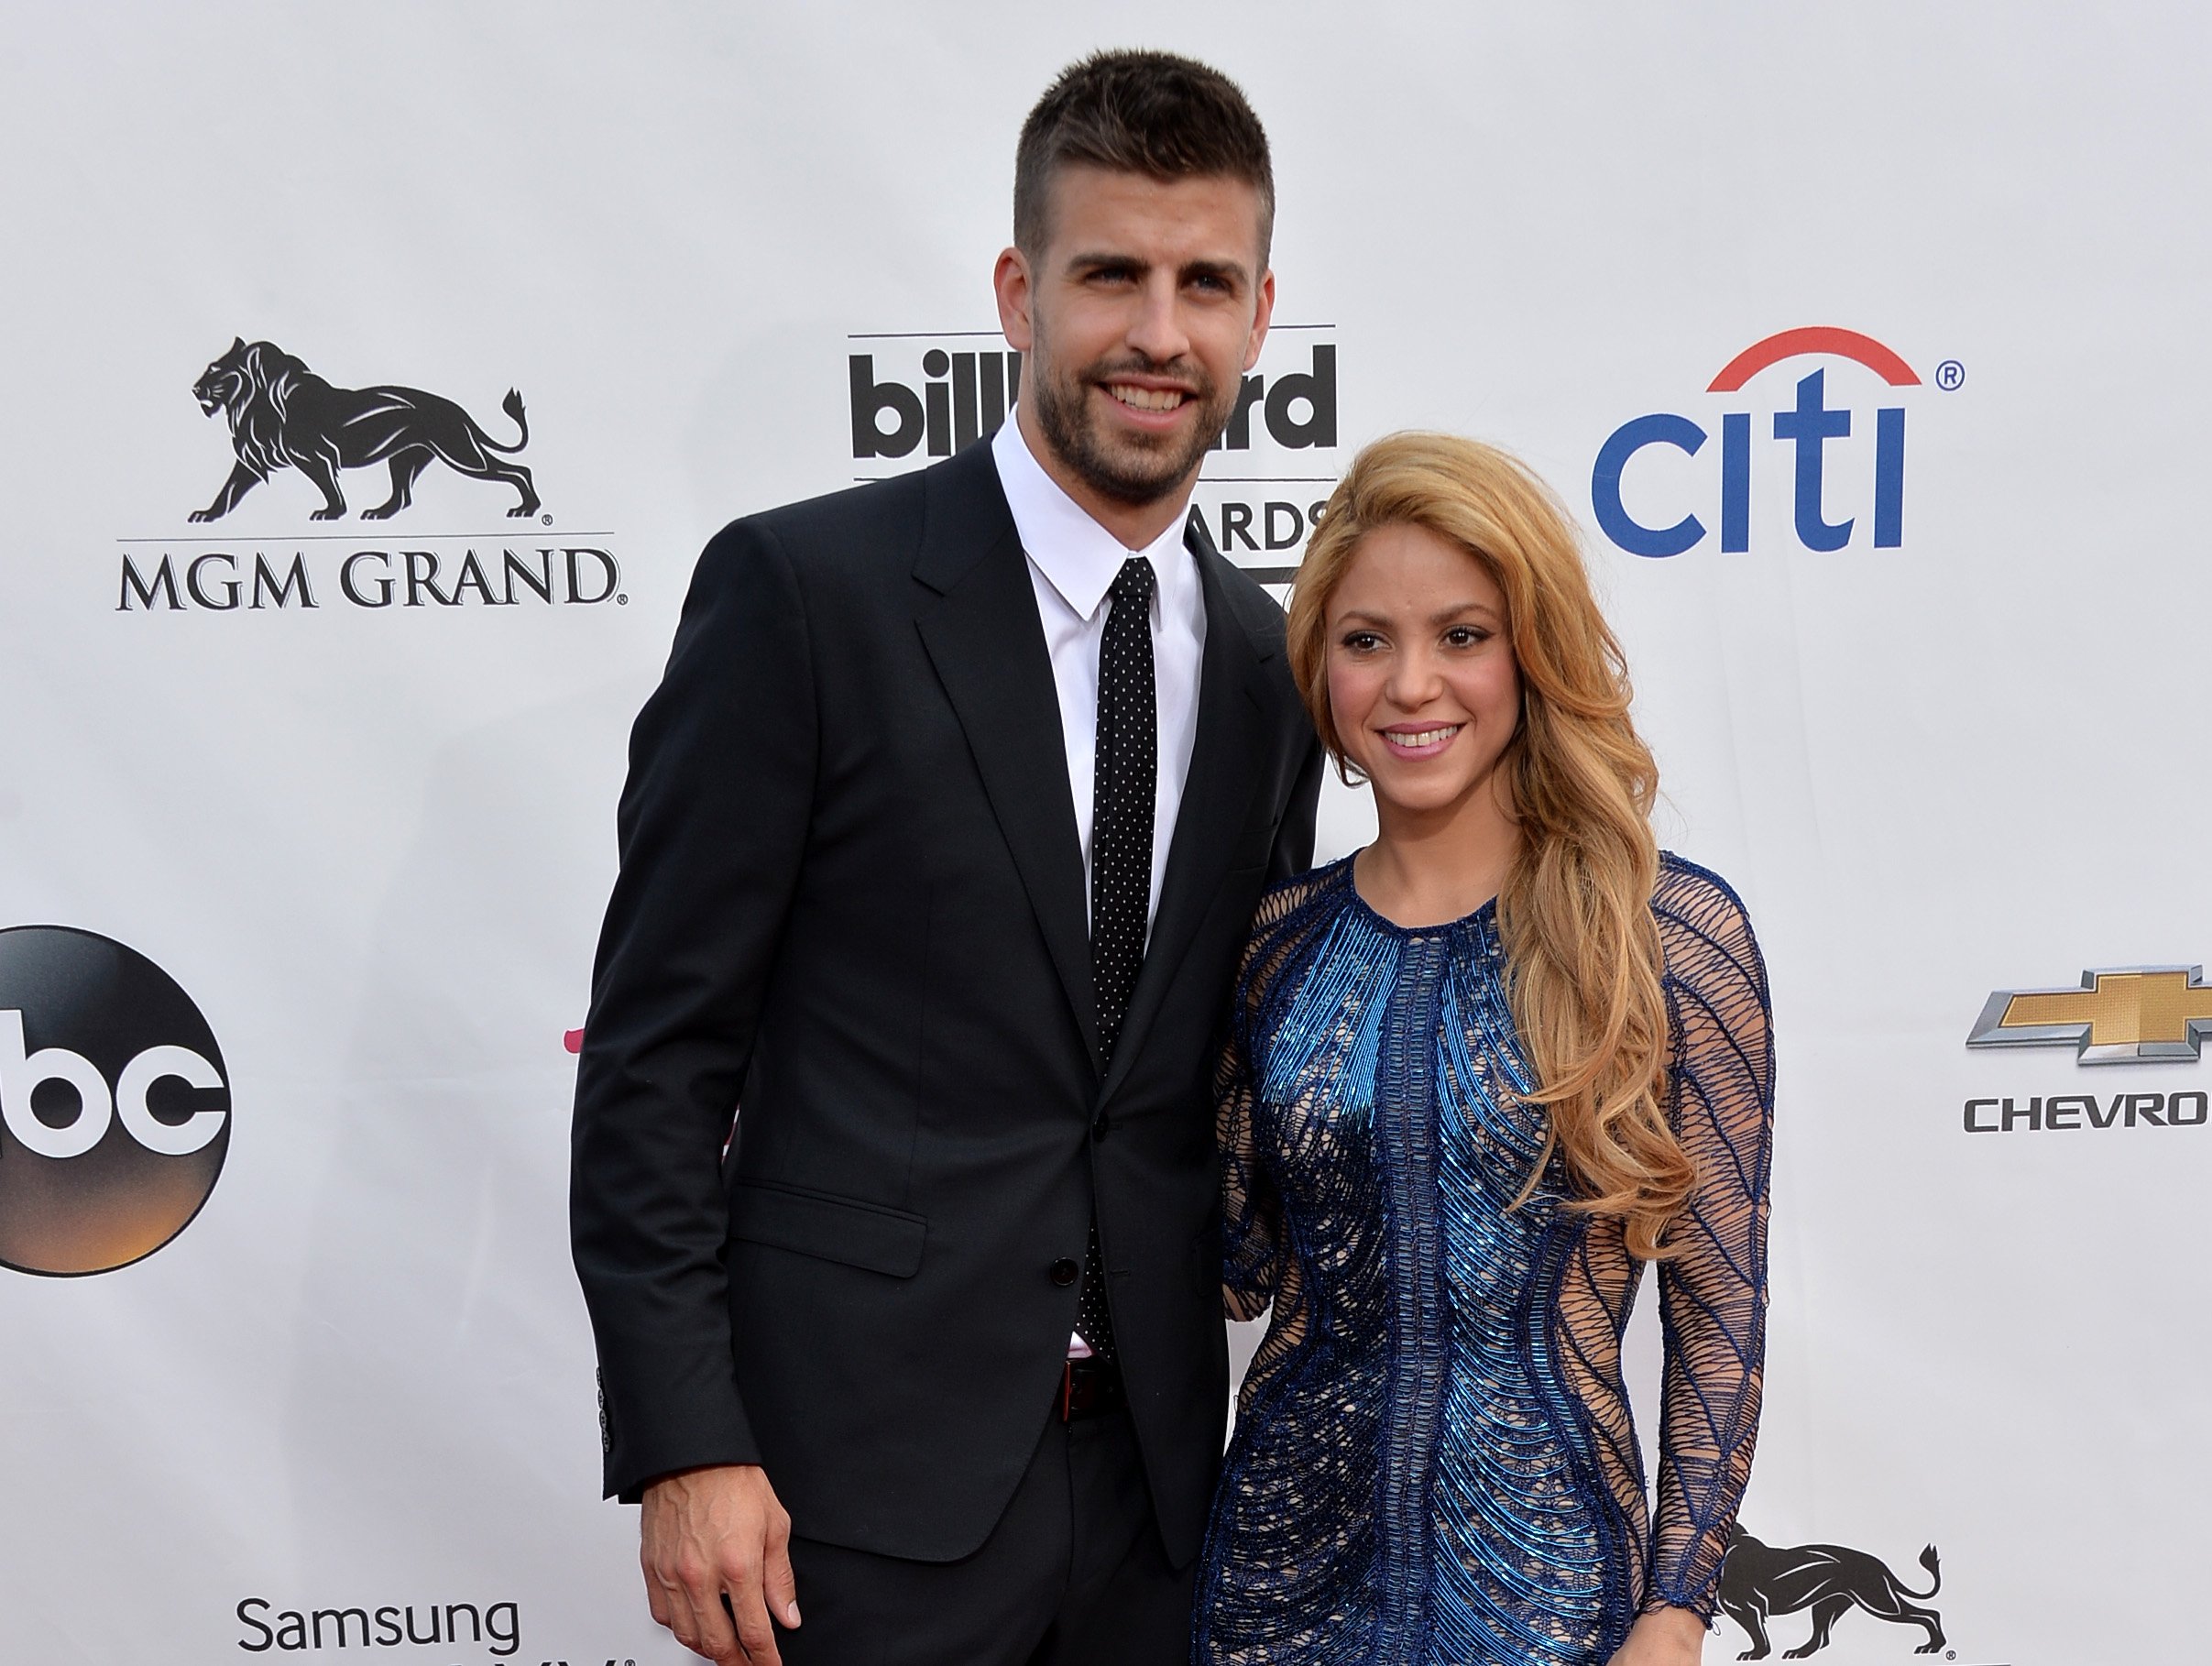 Shakira and FC Barcelona soccer player Gerard Pique attend the 2014 Billboard Music Awards in Las Vegas. | Photo: Getty Images